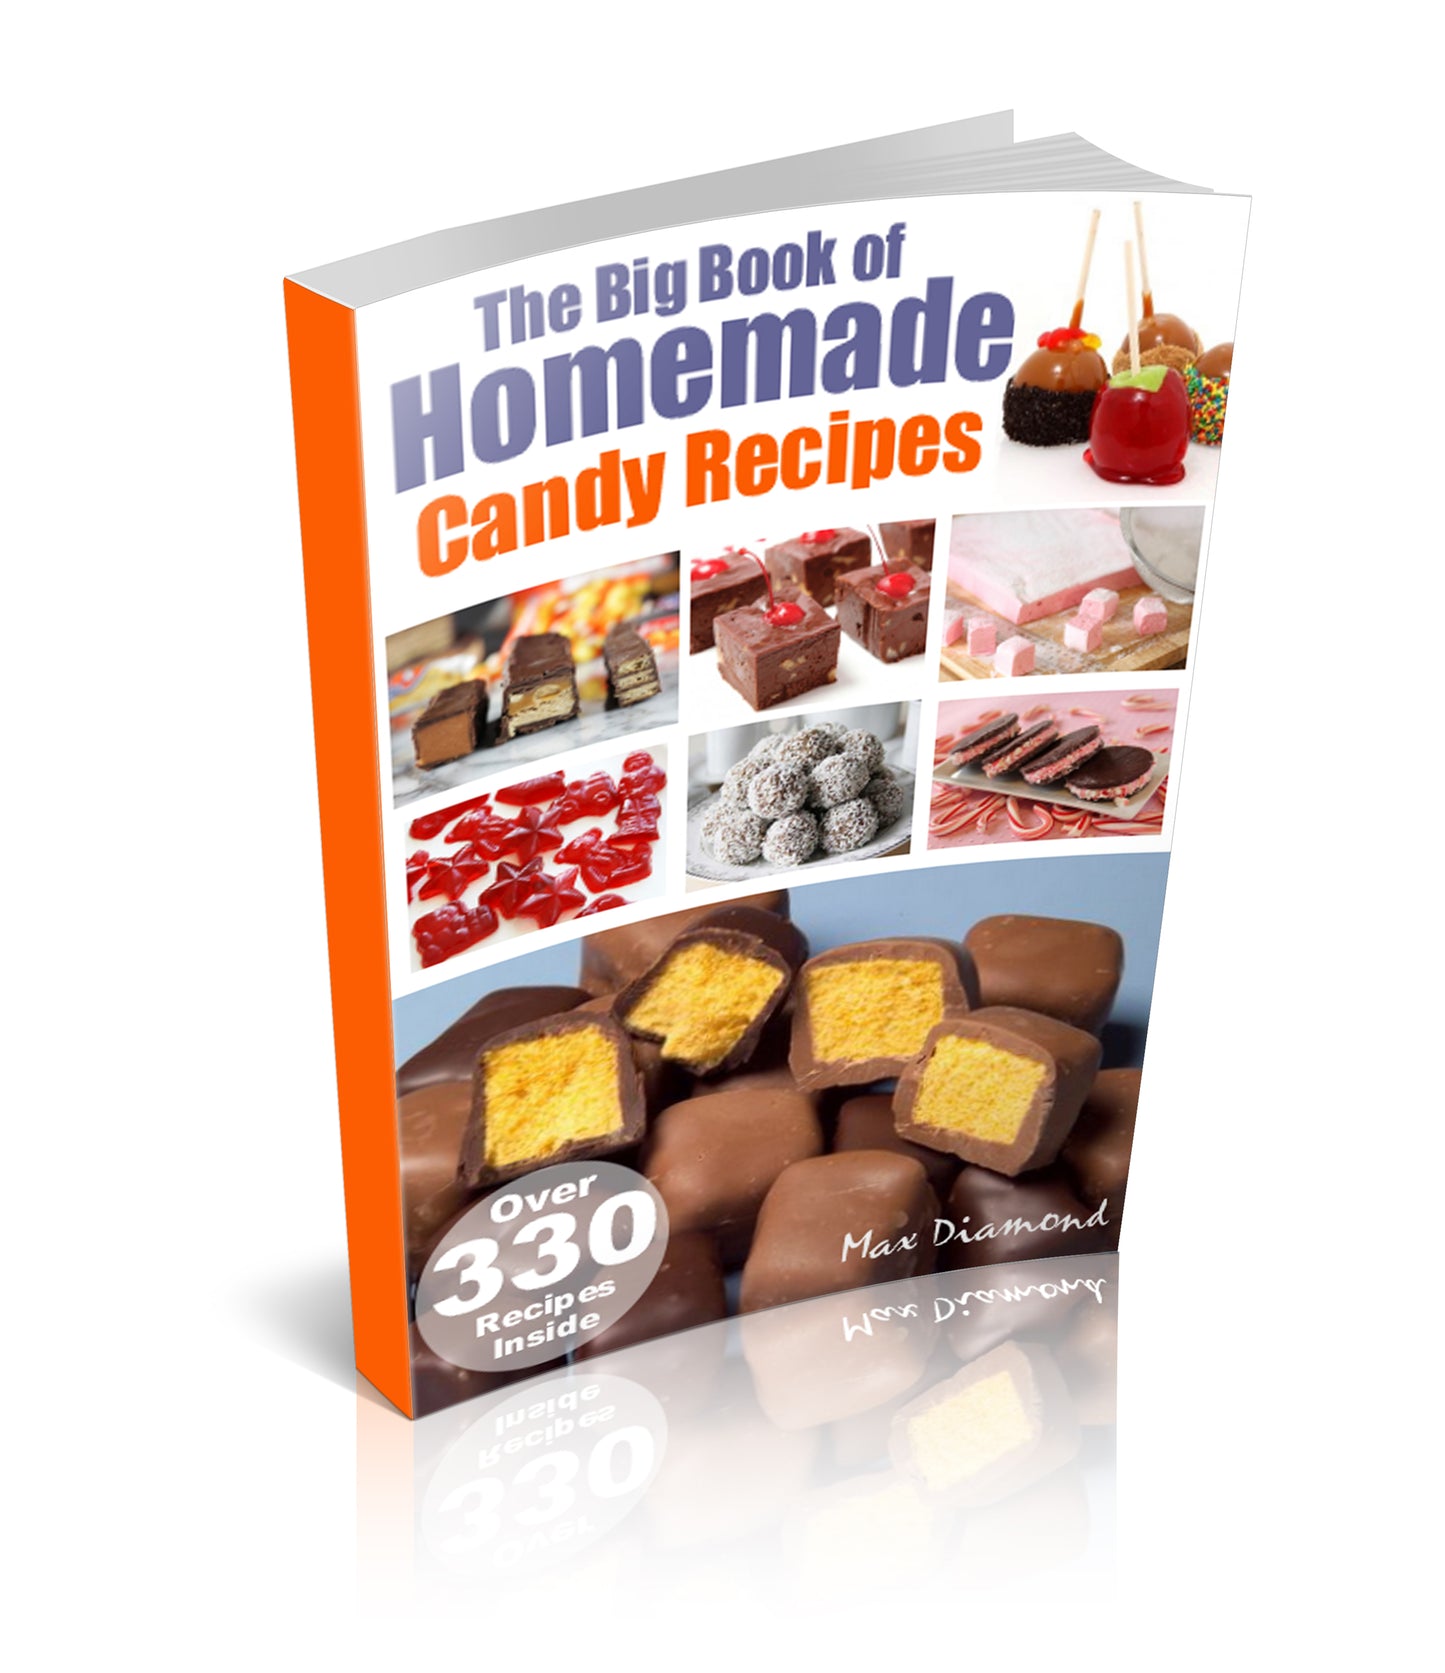 The Big Book of Homemade Candy Recipies